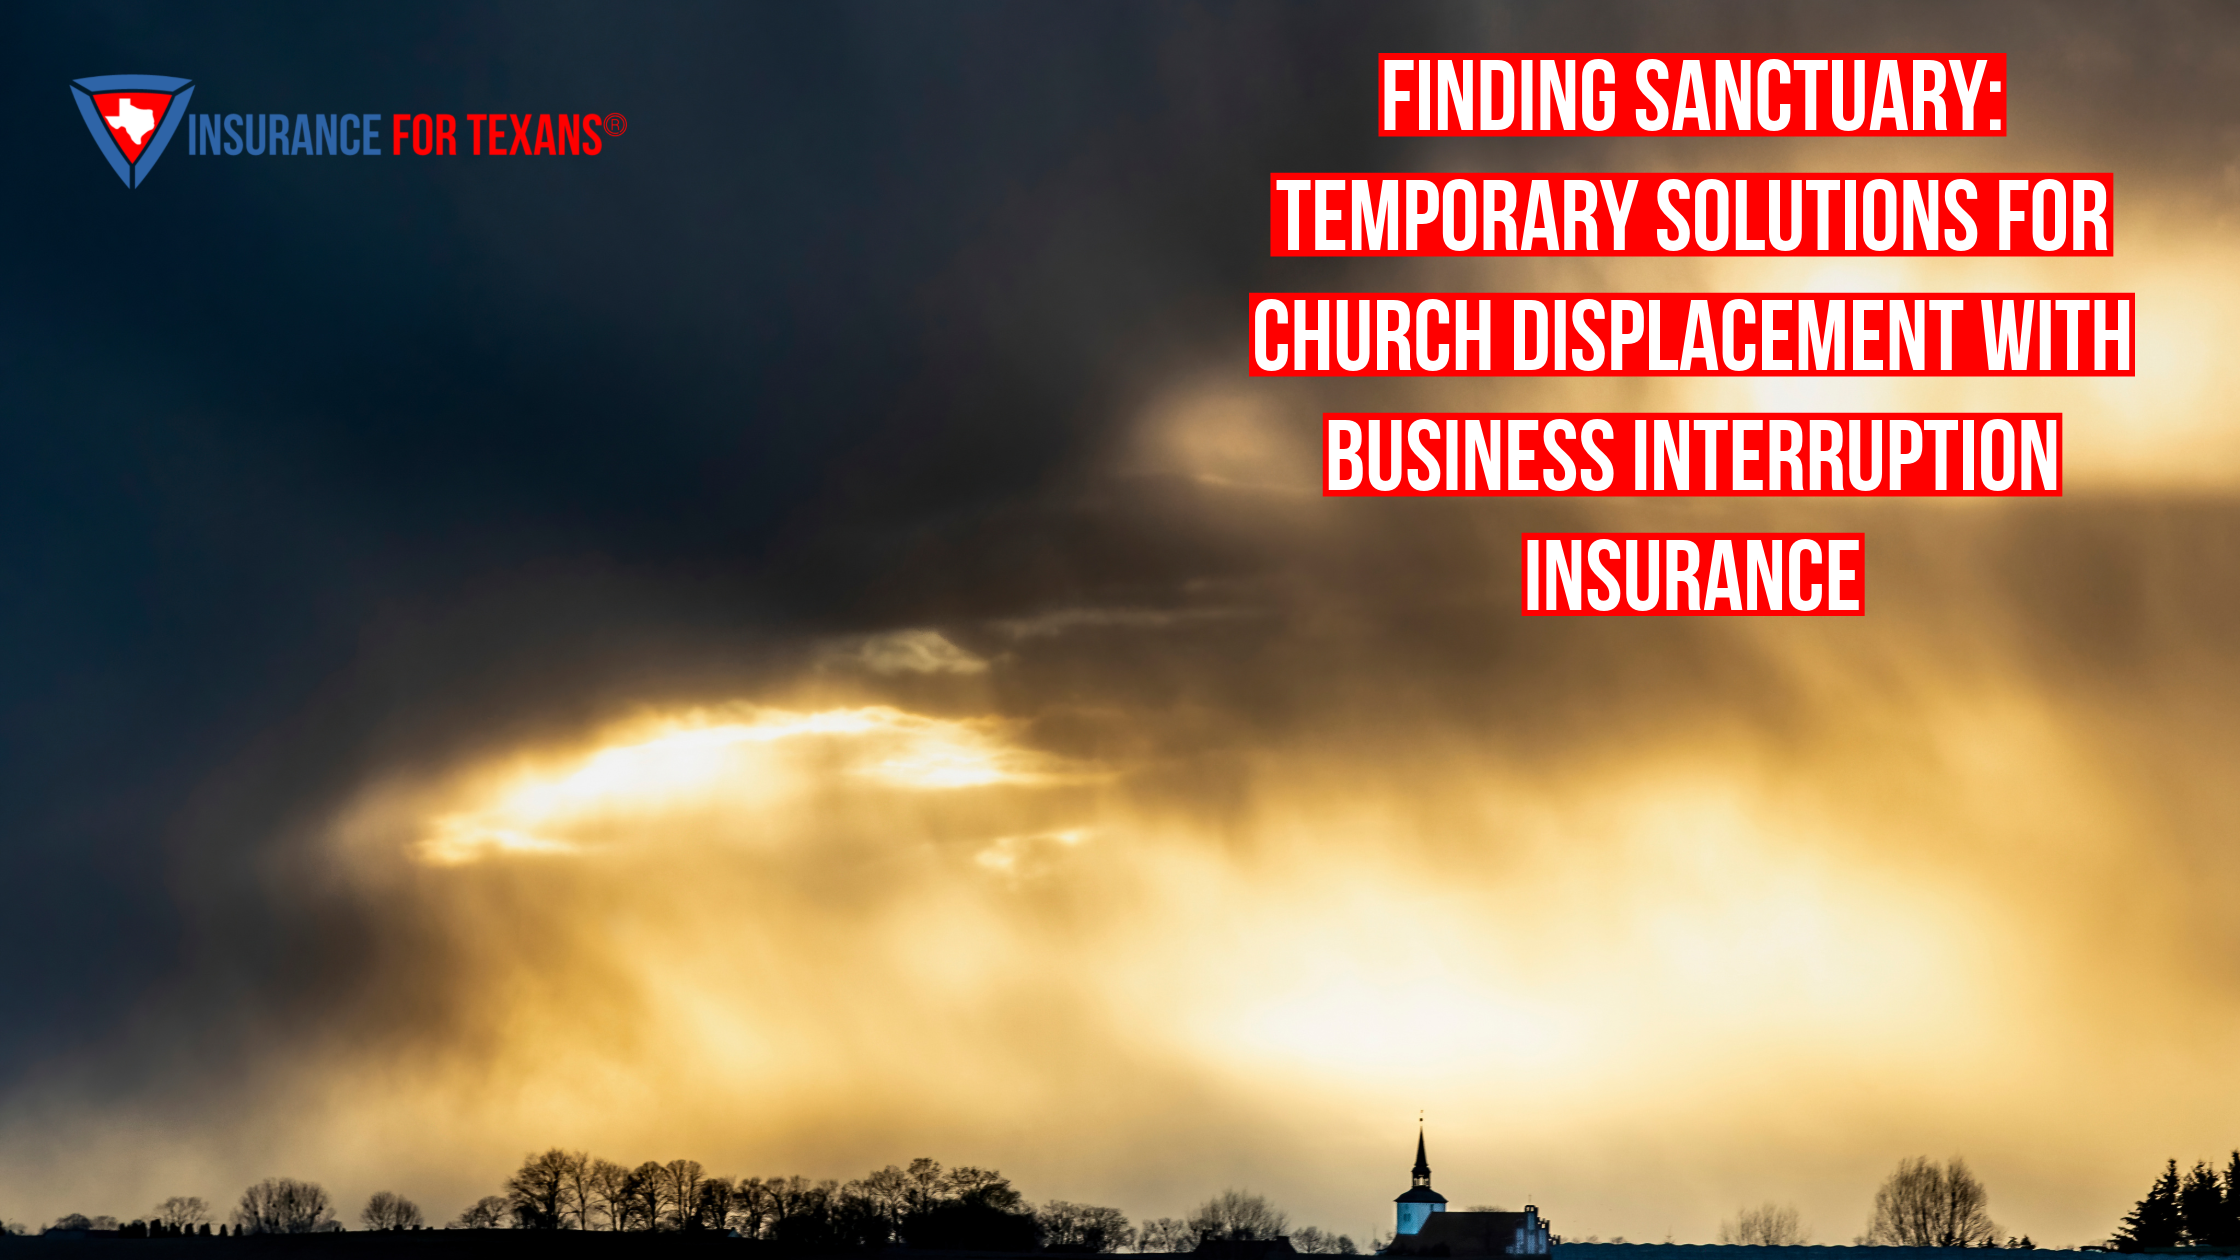 Finding Sanctuary: Temporary Solutions for Church Displacement With Business Interruption Insurance